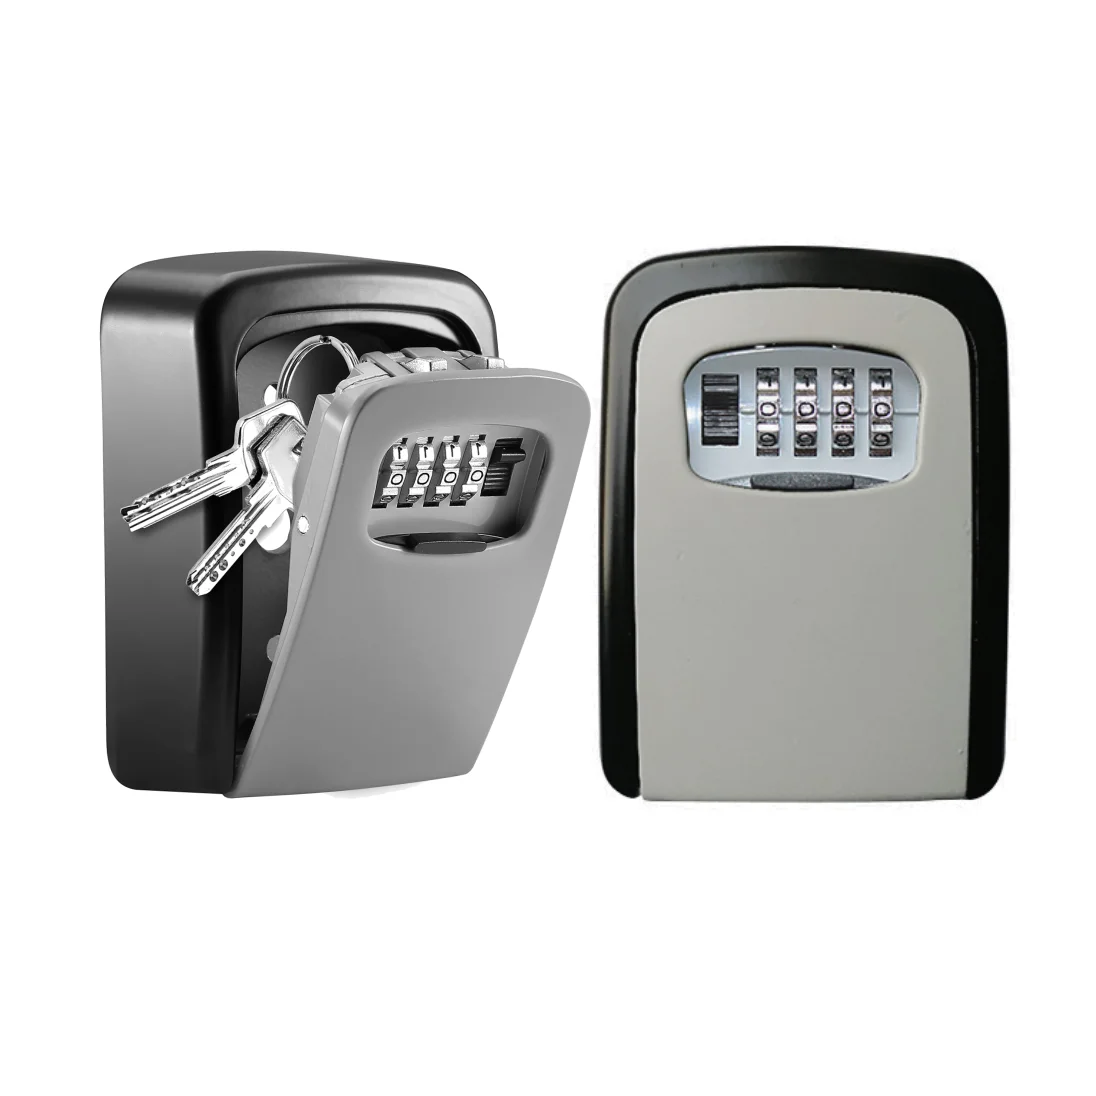 4 Digit Password Combination Key Lock Box Outdoor Wall Mounted Security Storage 